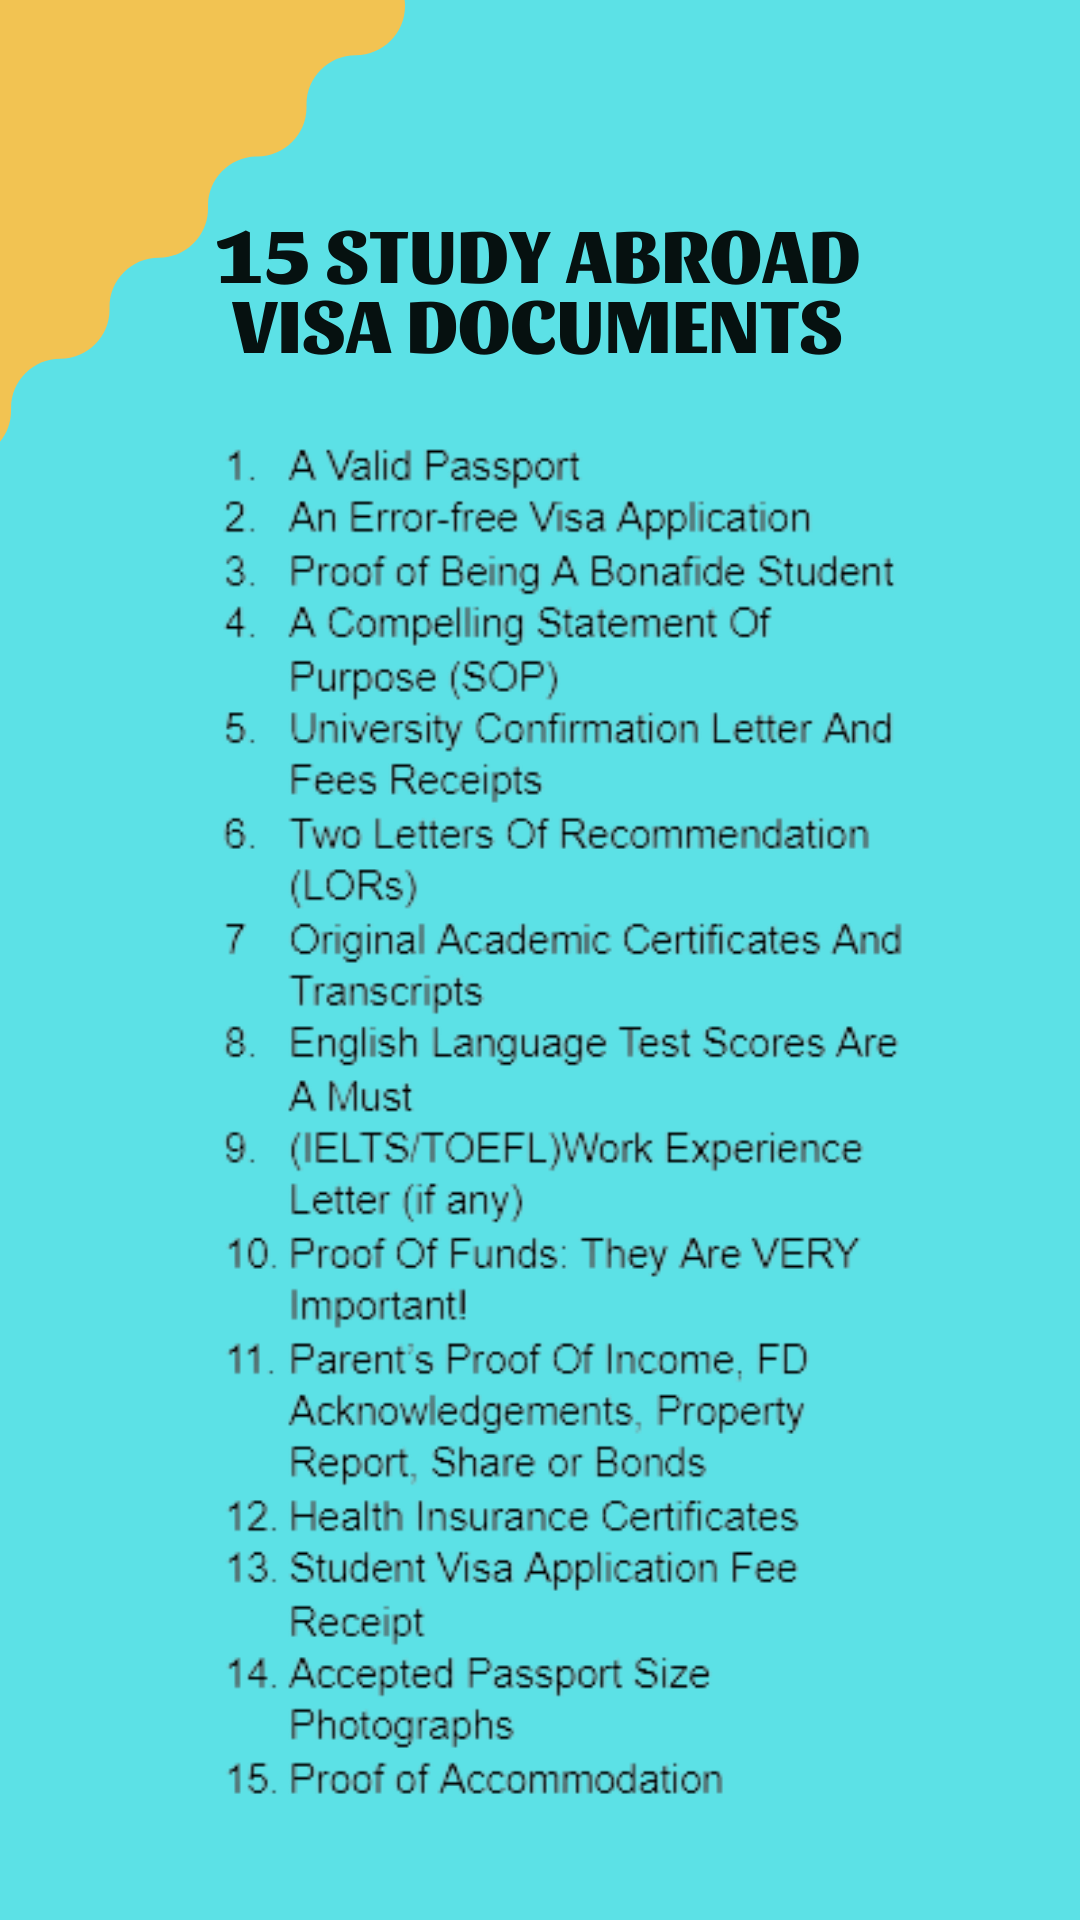 Documents you need to show to get a student visa without an IELTS score for USA universities